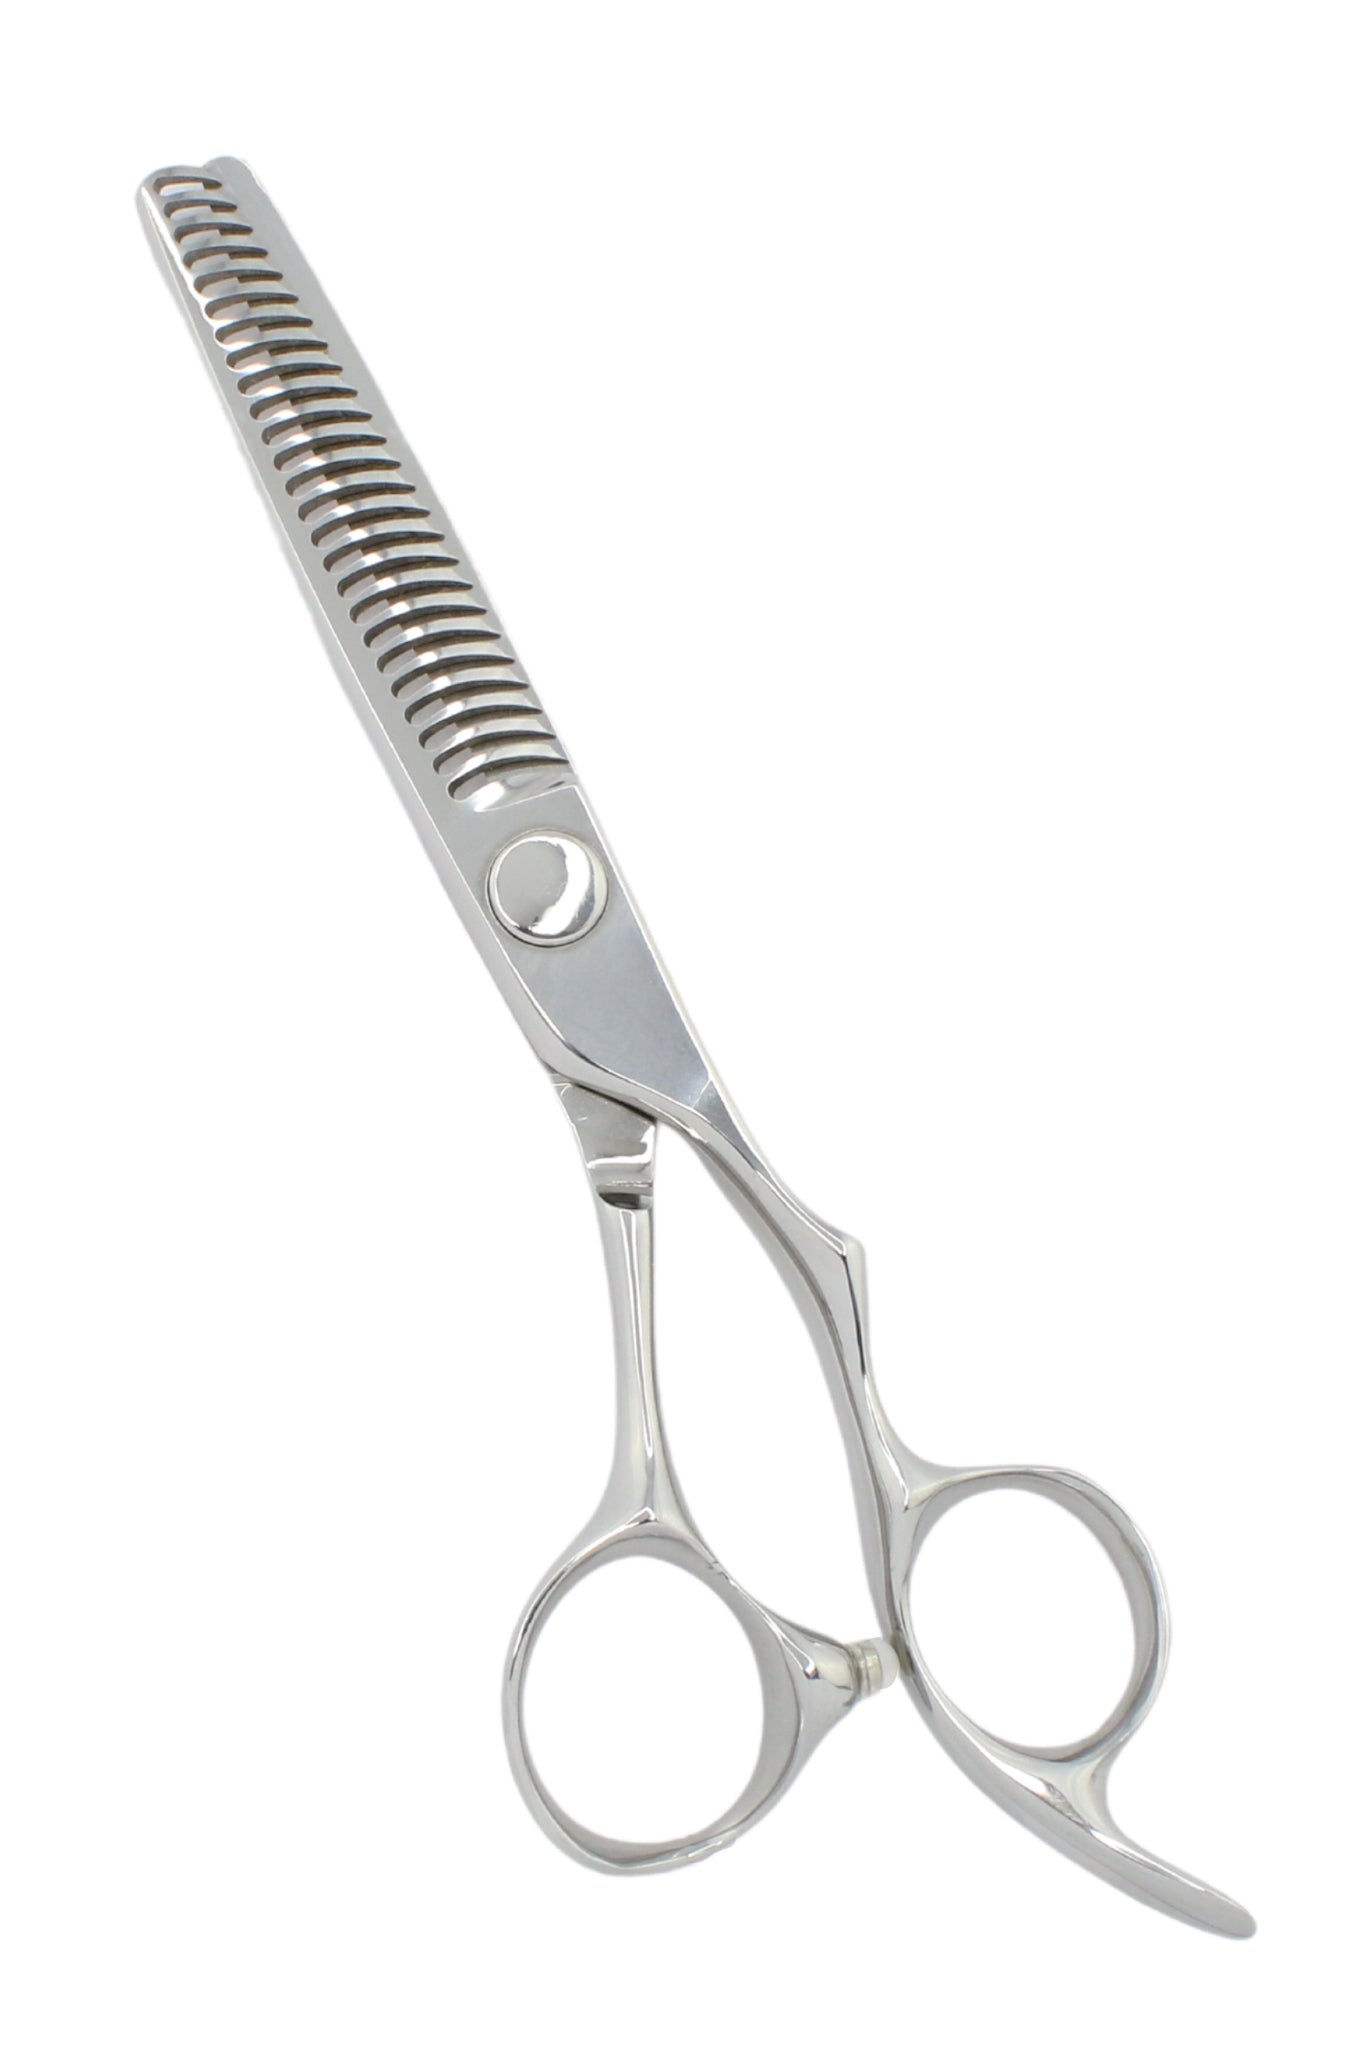 iCandy SABRE VG10 Thinning Scissors (6.1 inch) Pic1